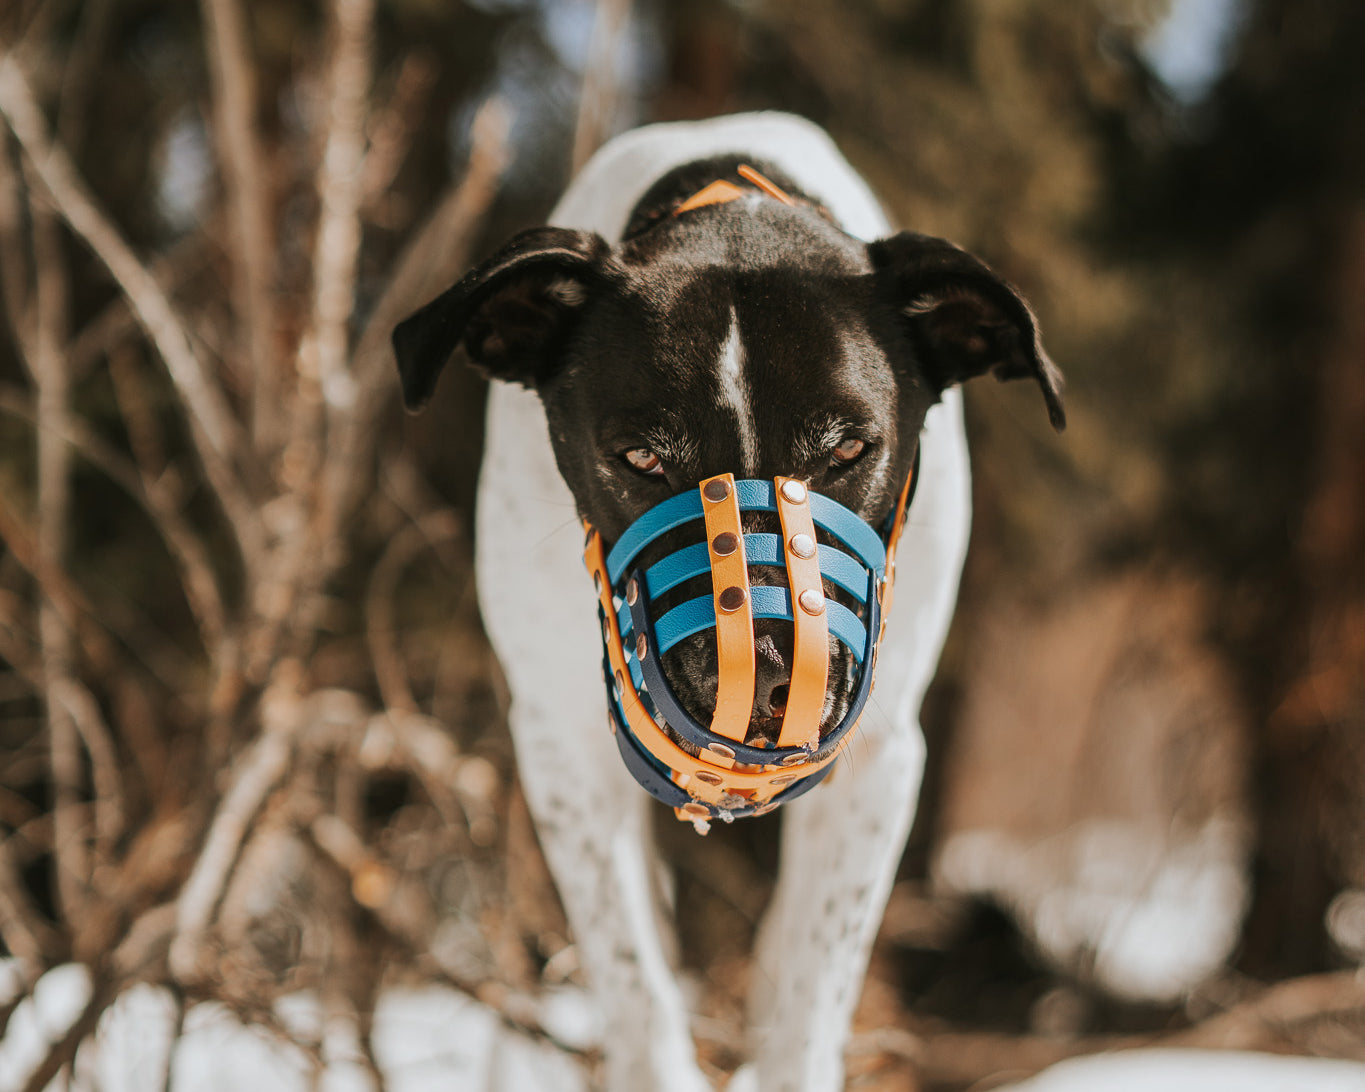 Muzzle Up - When & Why Some Dogs Use Muzzles